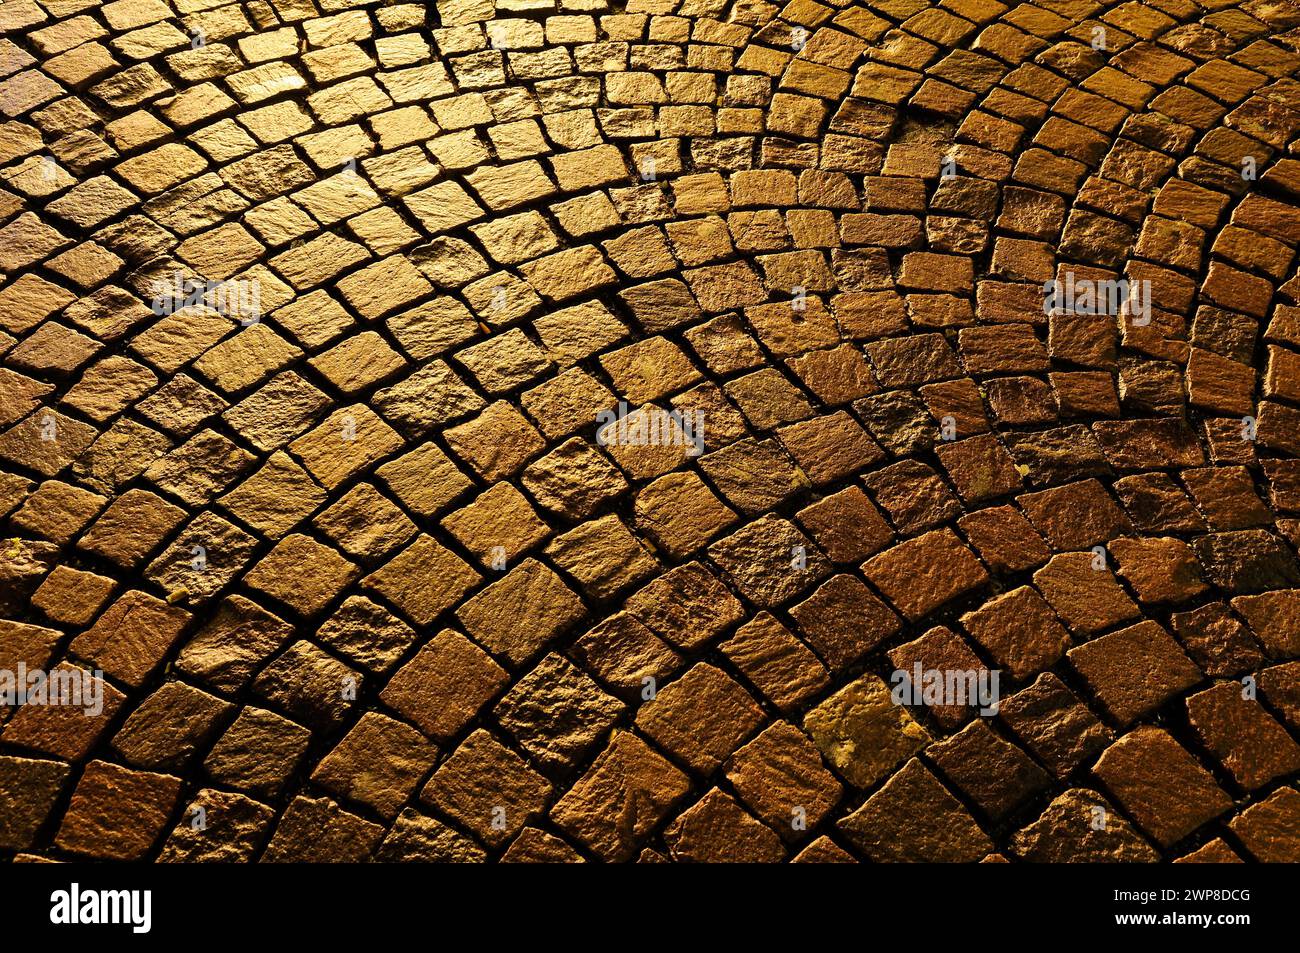 An abstract tile background with assorted brick sizes and shapes Stock Photo